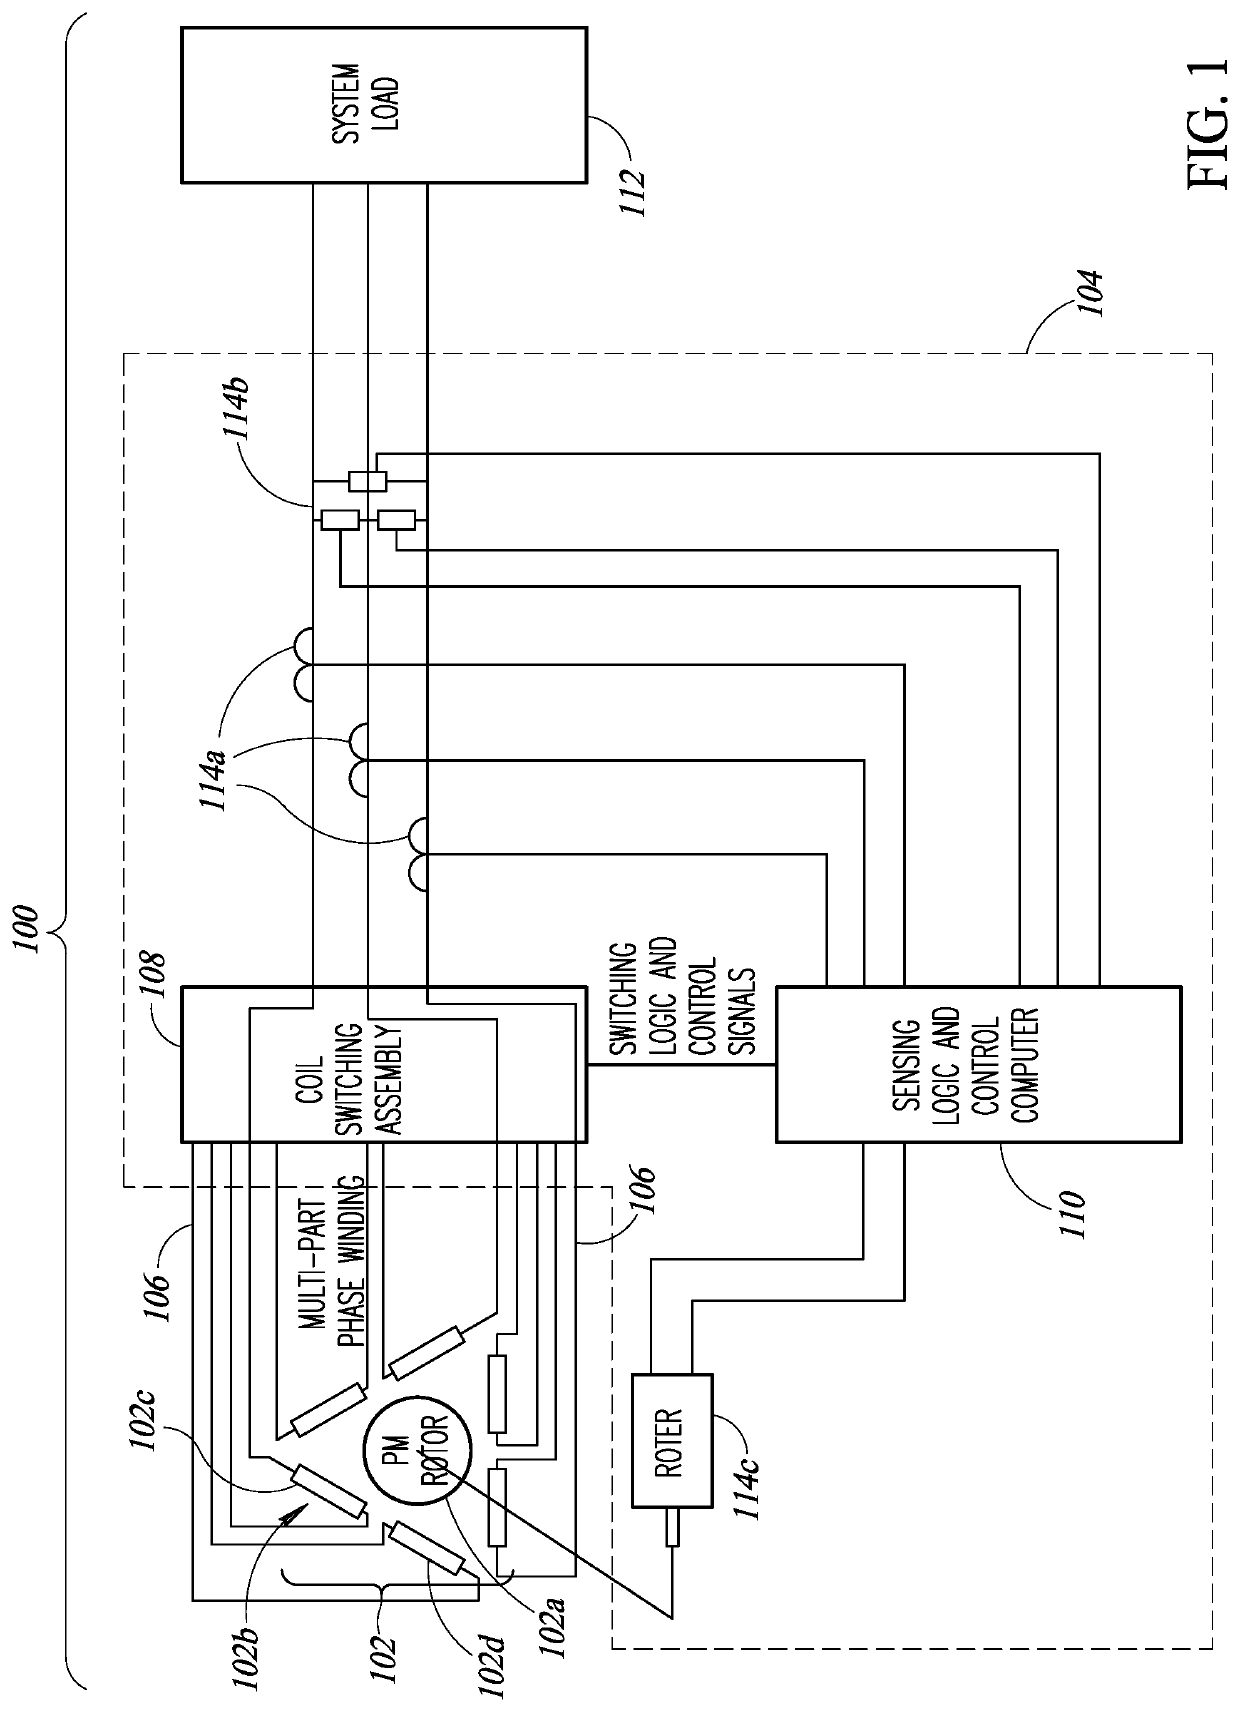 Variable coil configuration system control, apparatus and method